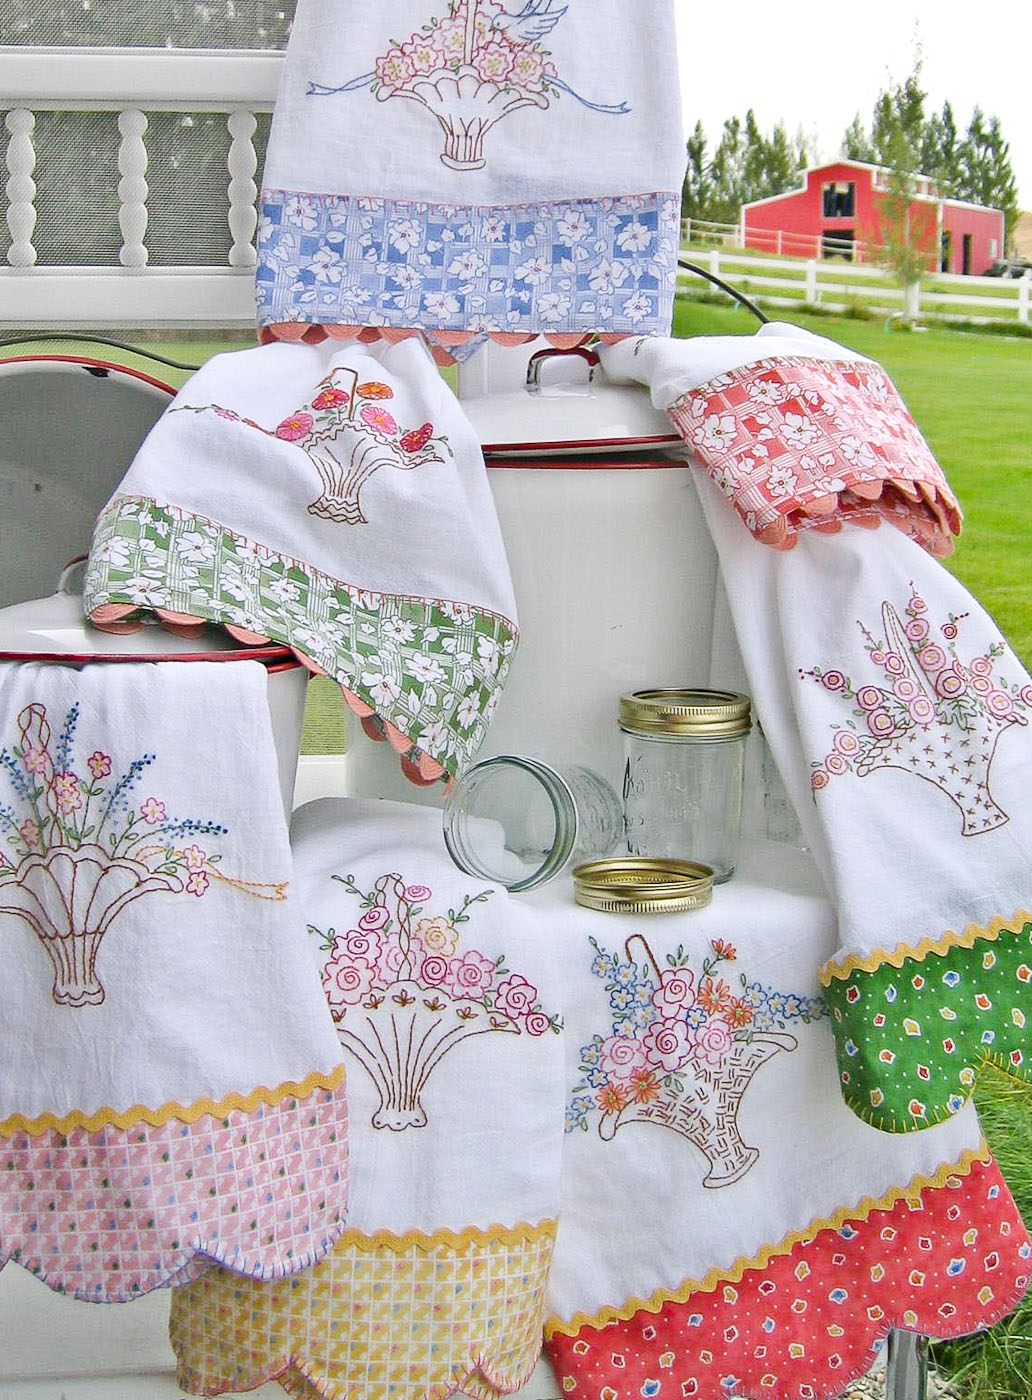 Vintage Hand Embroidery Patterns Hand Embroidery Pattern Grandmas Tea Towels